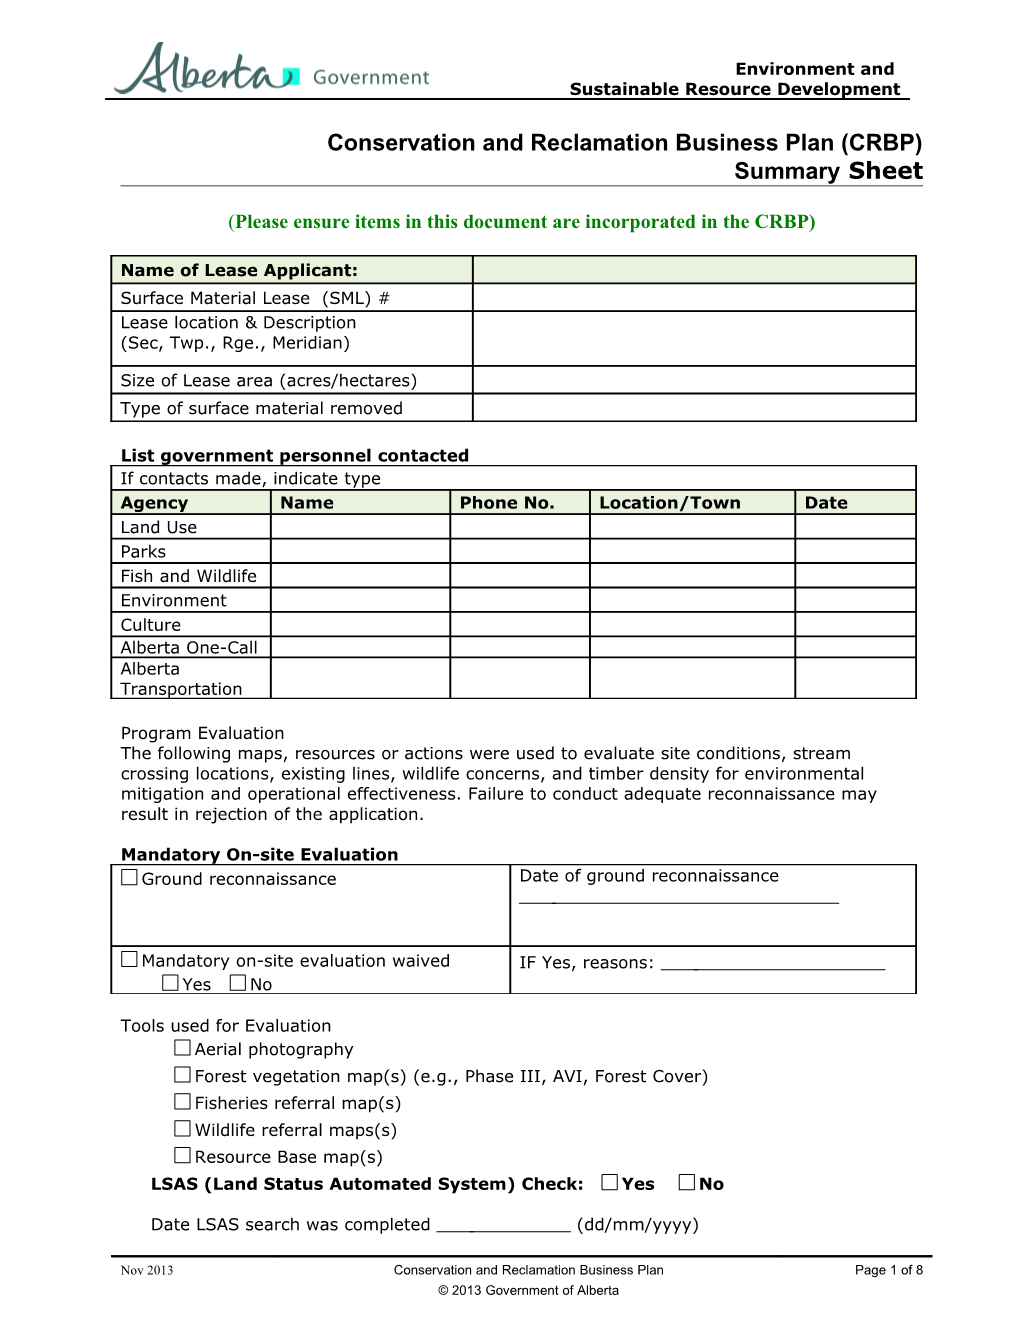 Conservation and Reclamation Business Plan (CRBP) Summary Sheet Form